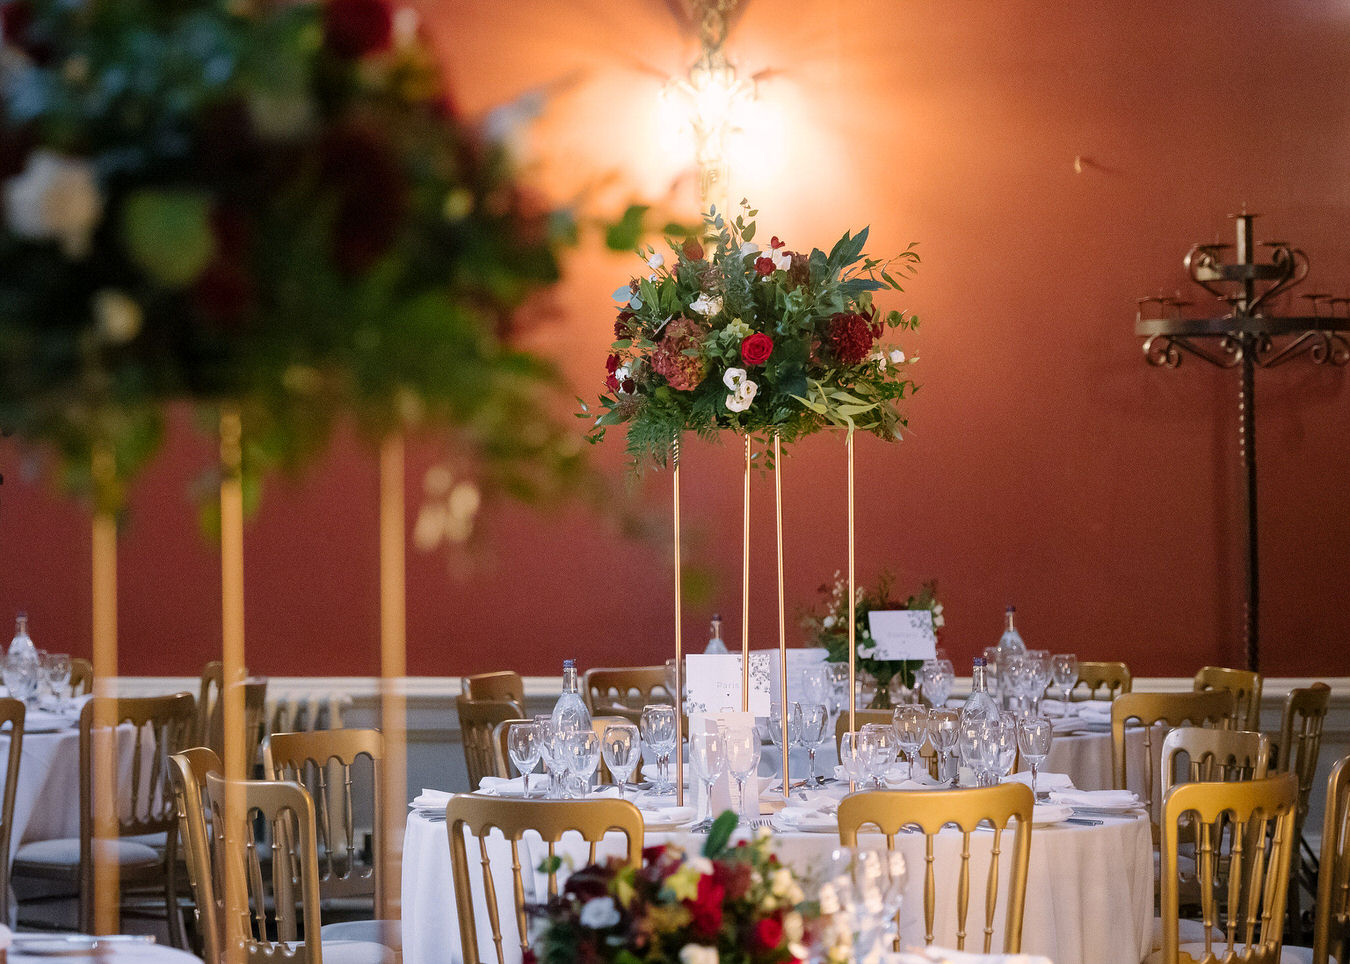 Asian wedding tall table centerpiece with dark red & white flowers at Hampton Court House reception